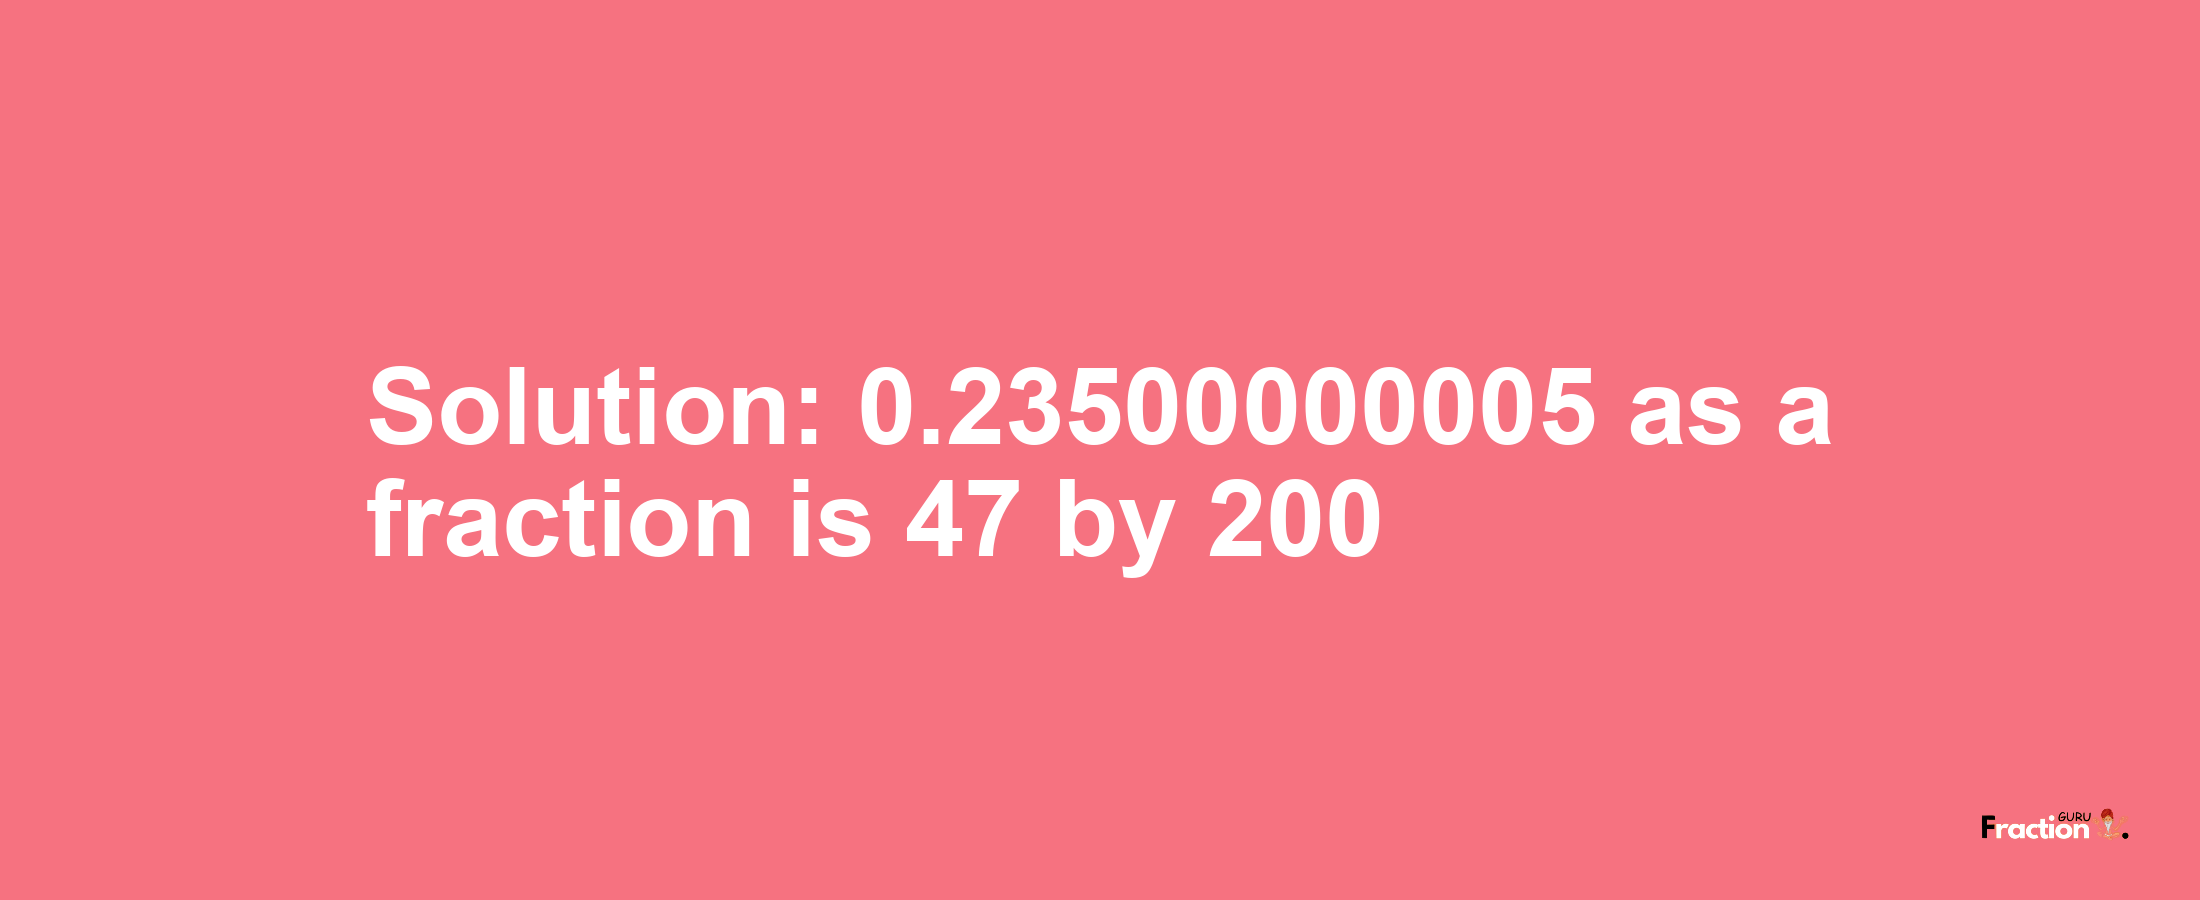 Solution:0.23500000005 as a fraction is 47/200